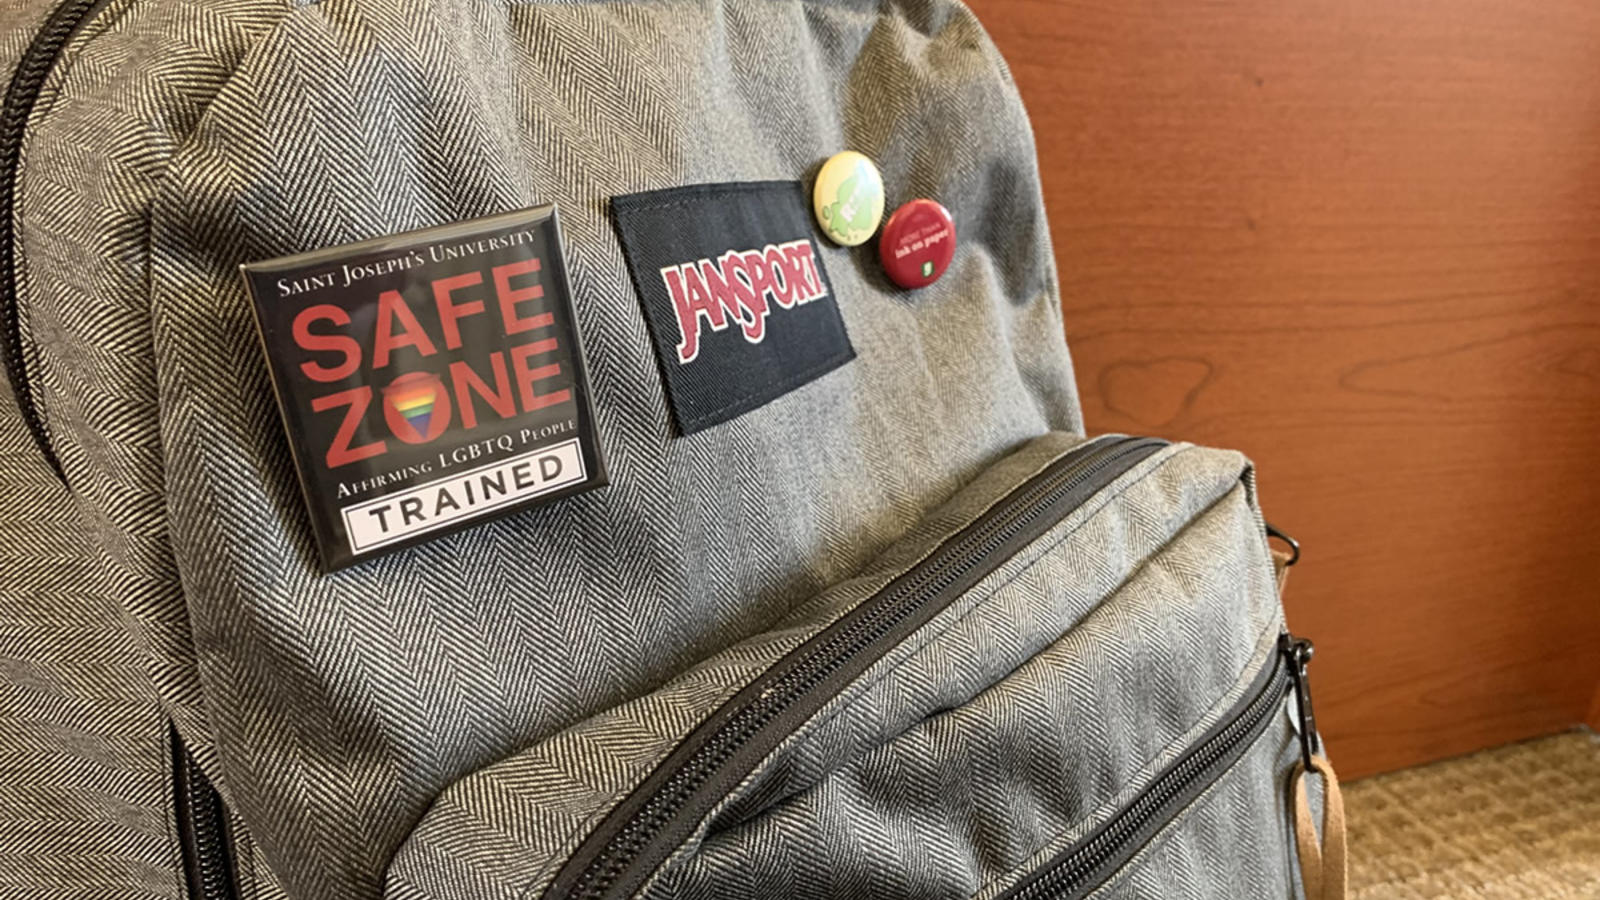 safe zone pin on backpack